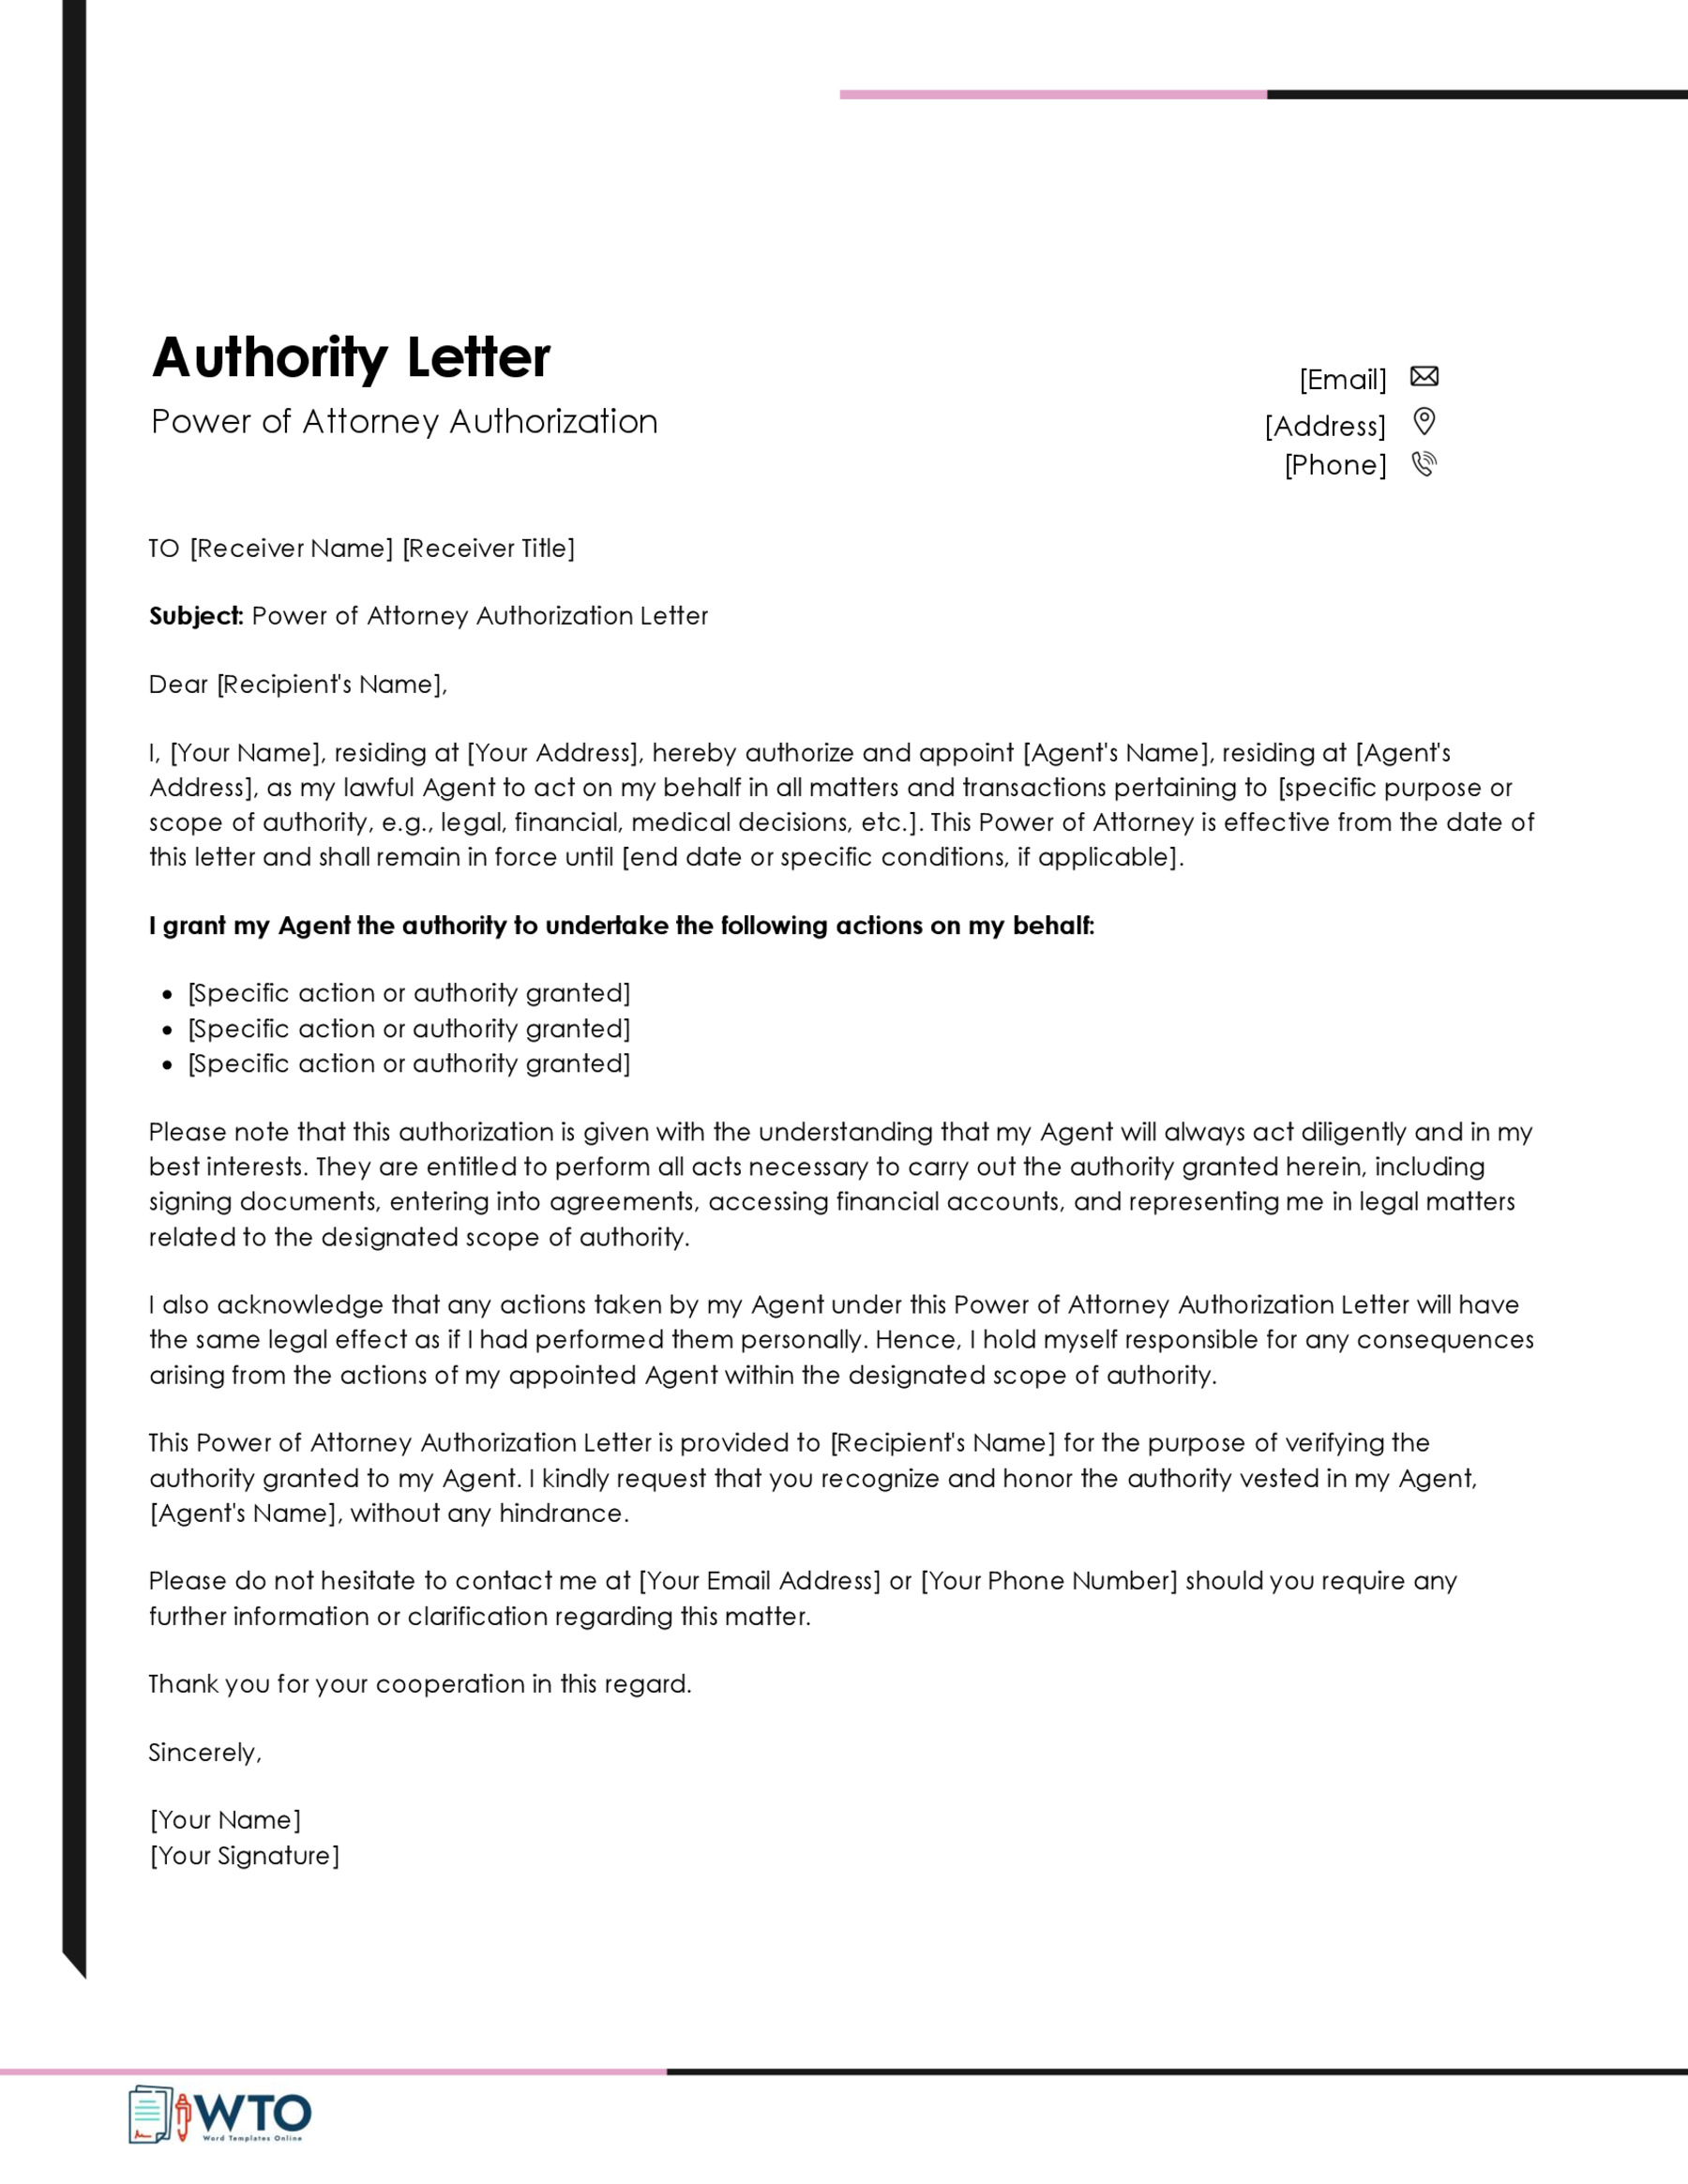 Editable Power of Attorney Authorization Letter Template 02 for Word